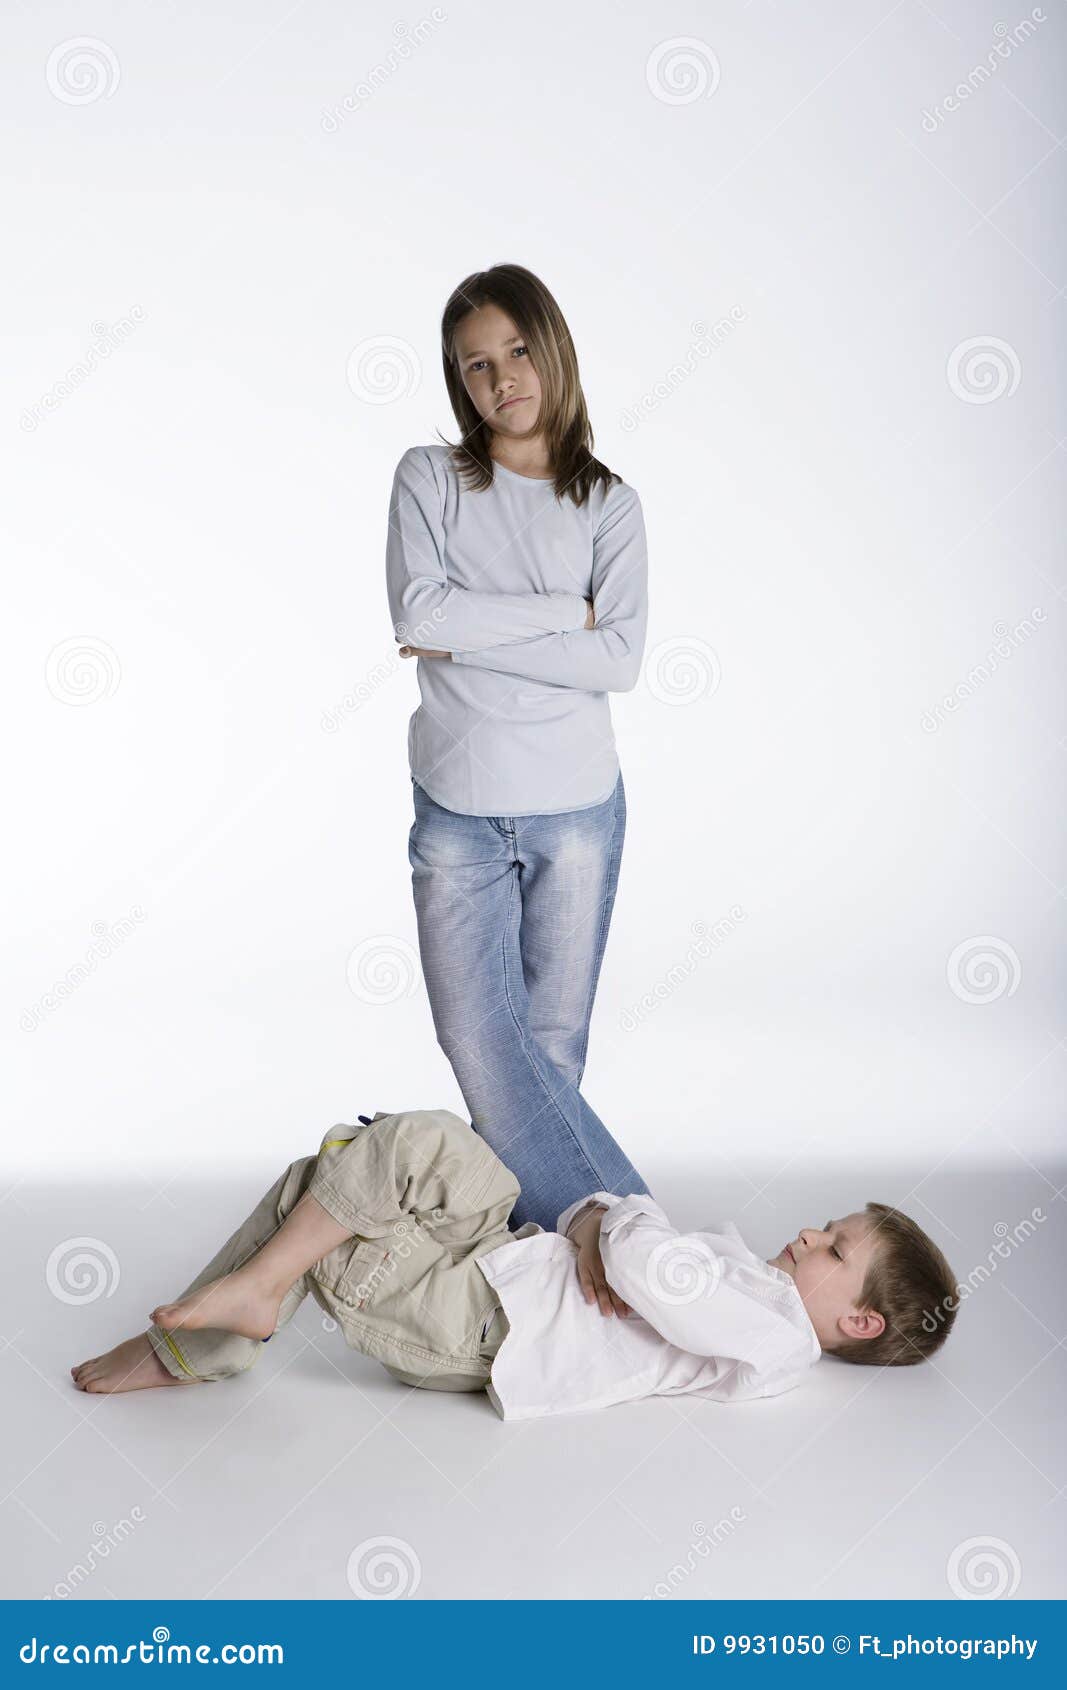 boy and girl angry after a dispute